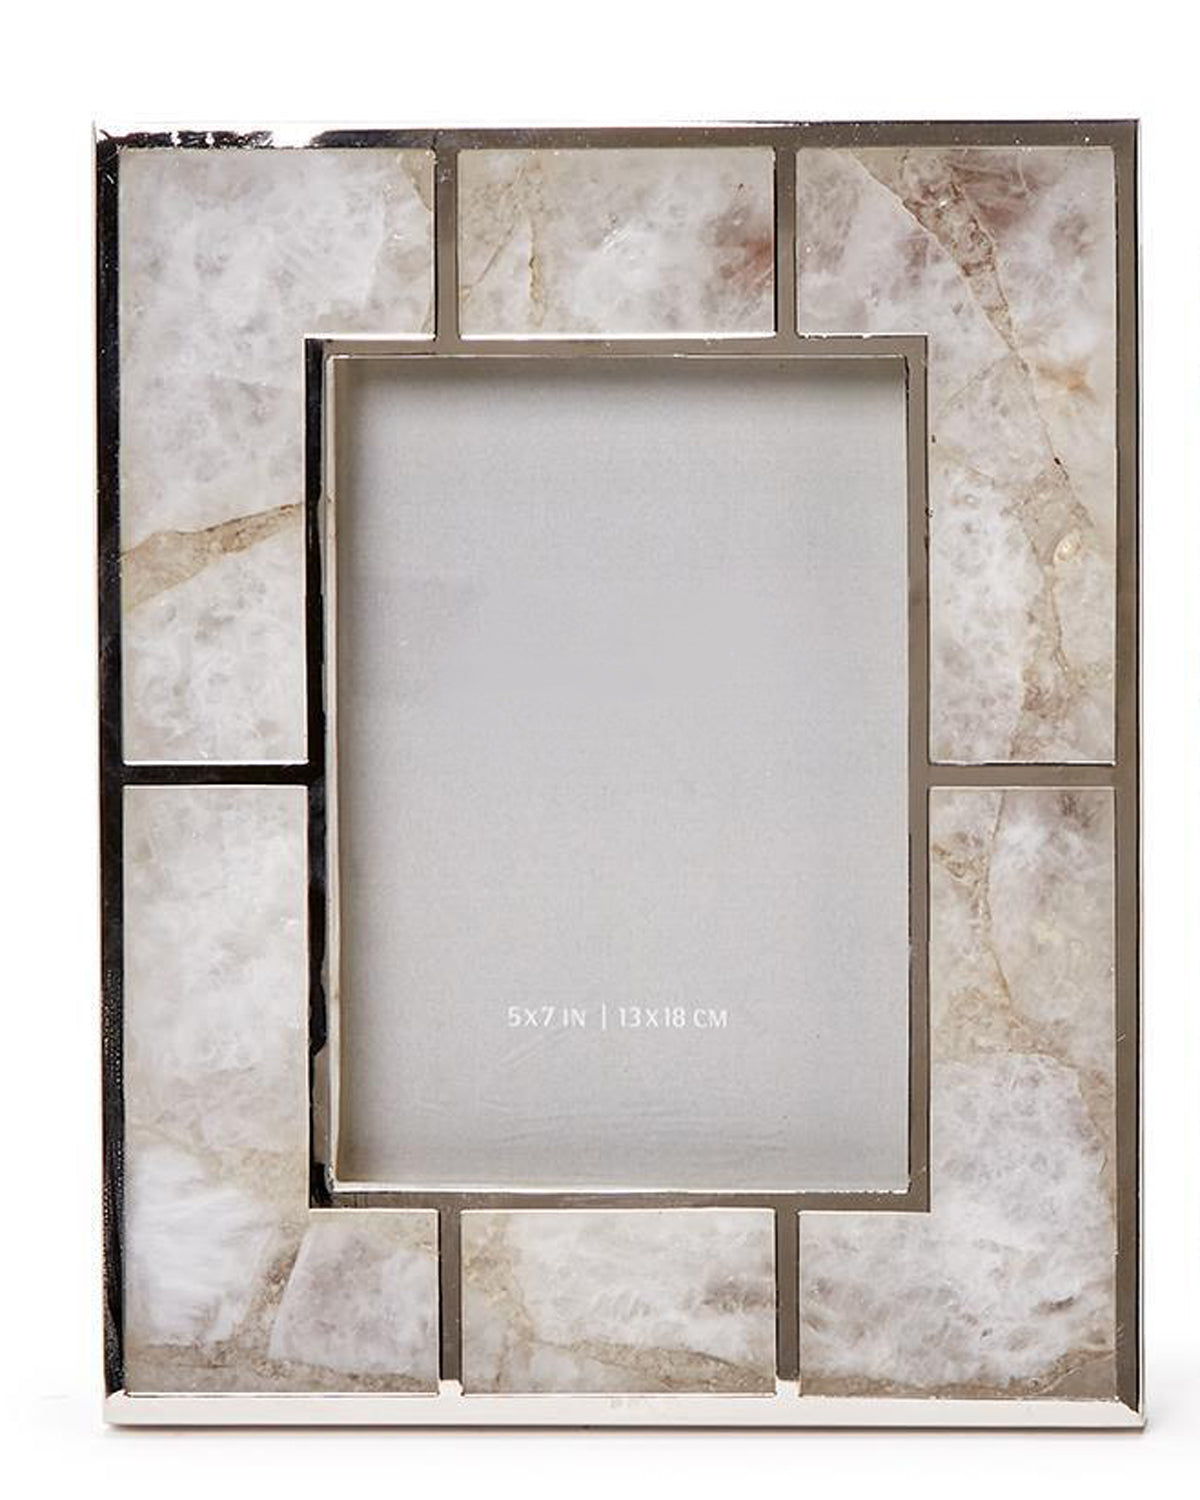 FRAME WHITE QUARTZ WITH NICKEL TRIM (Available in 2 Sizes)